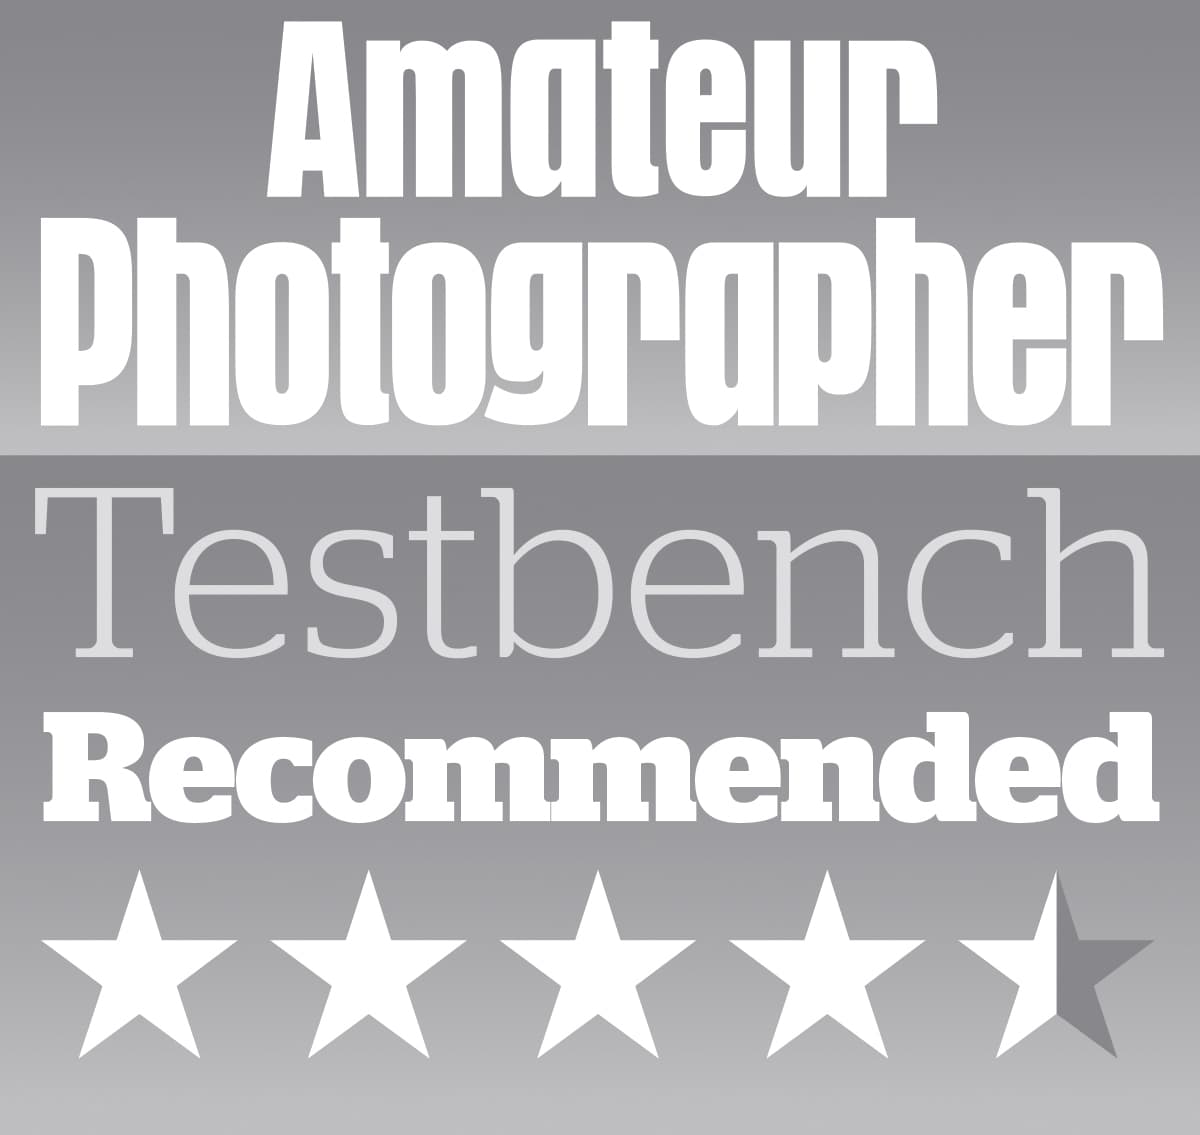 4.5 stars recommended testbench award